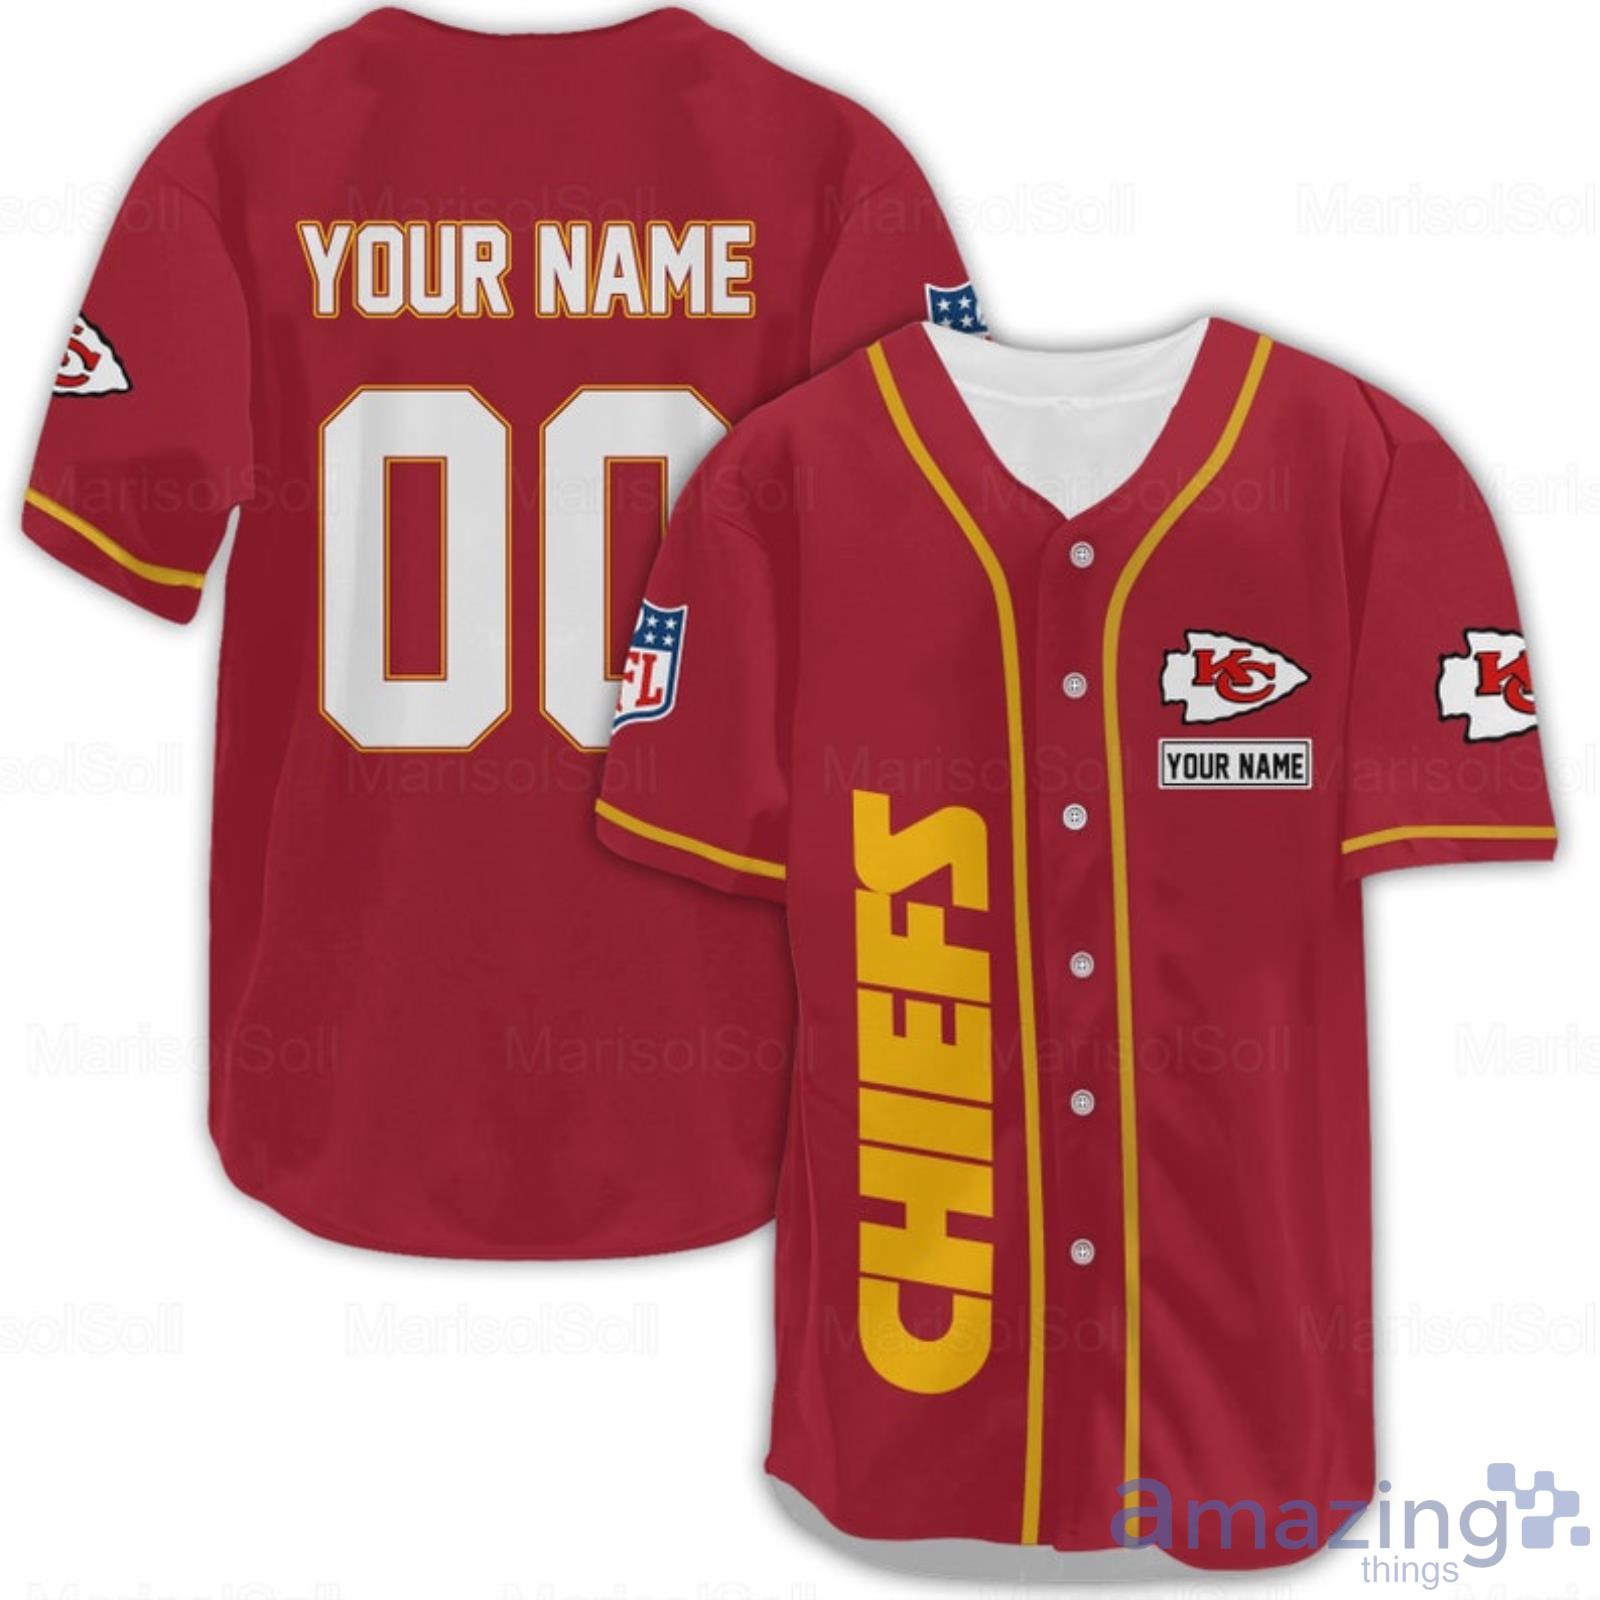  Custom Baseball Jersey Add Your Name and Number